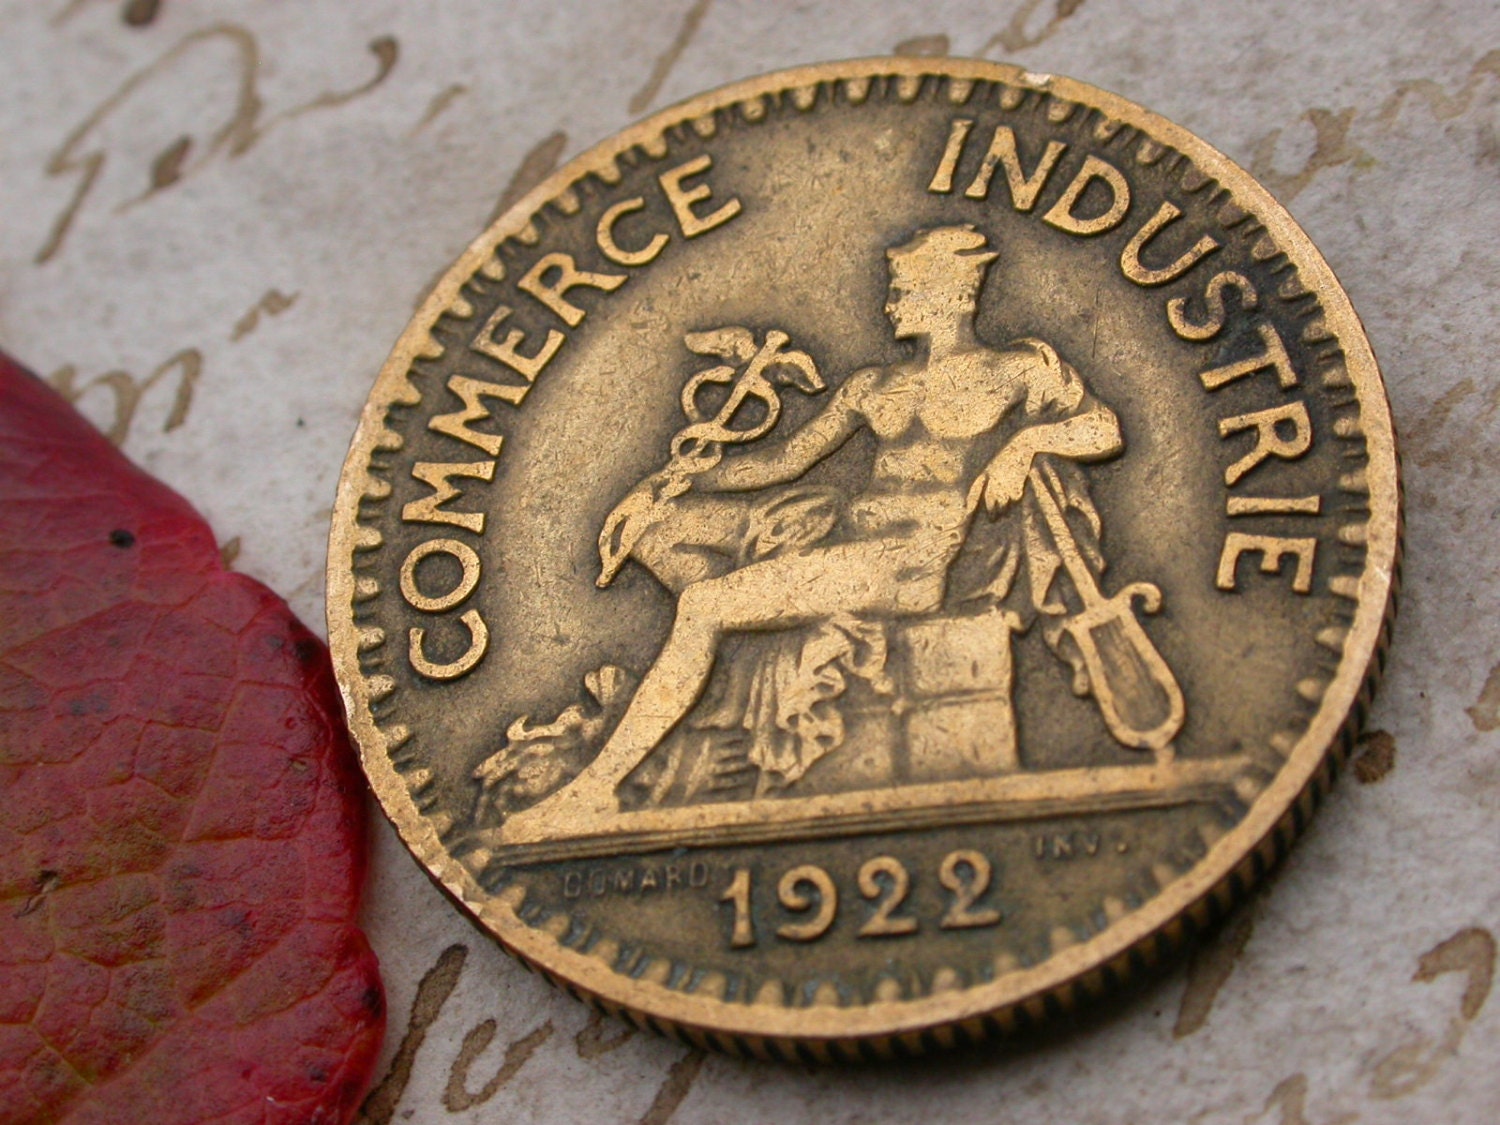 French old coins 2pcs vintage coins 1920s collectible art